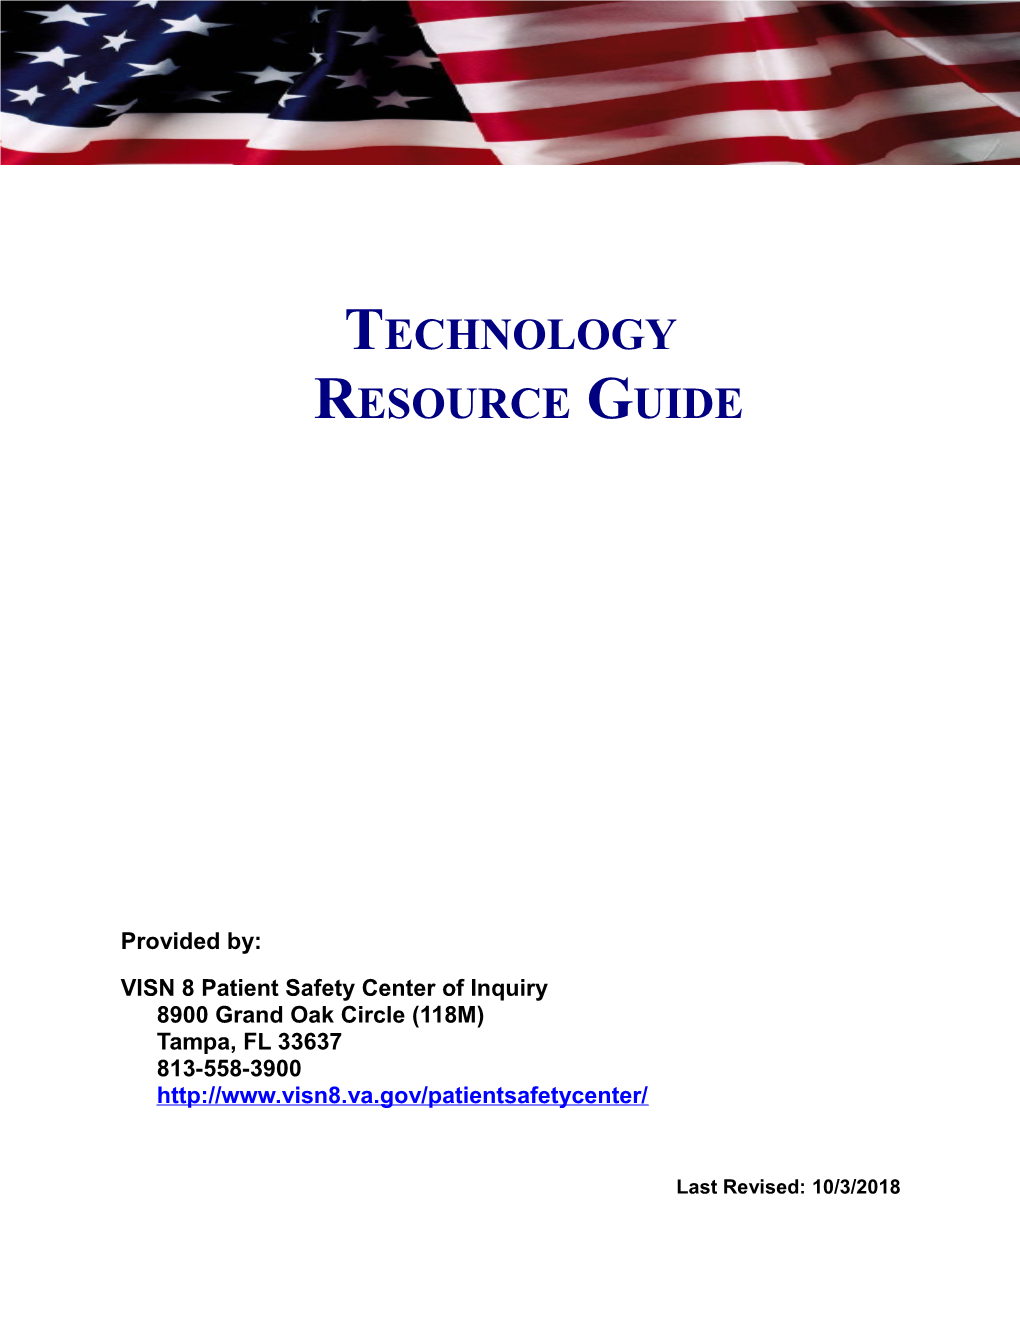 Technology Resource Guide